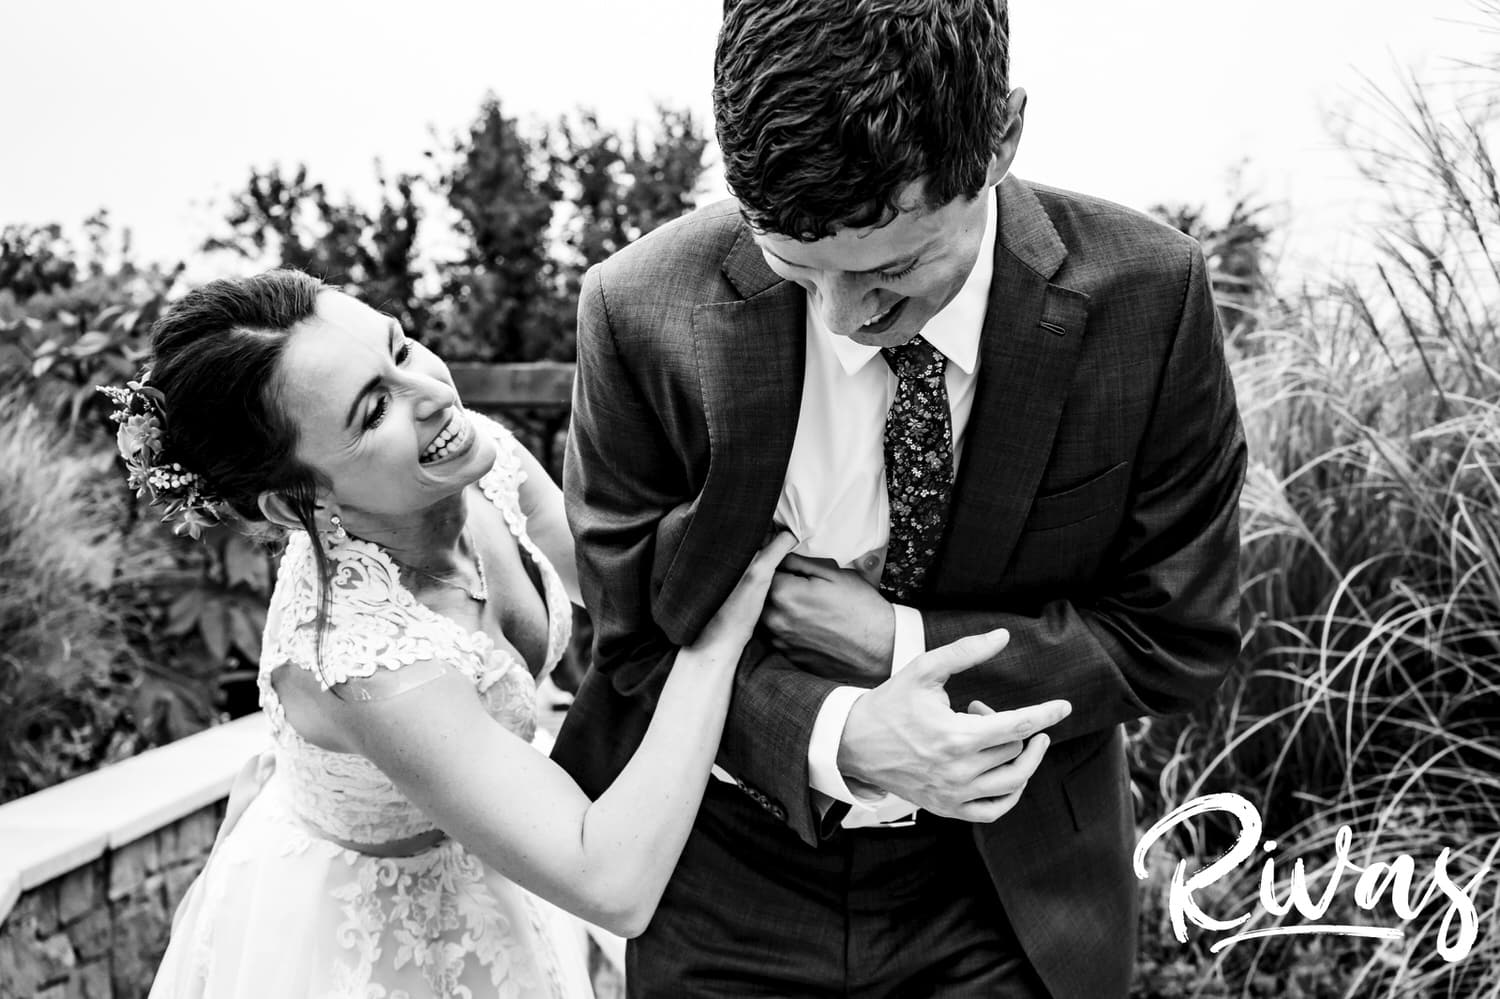 A silly, candid, black and white picture of a bride tickling her groom on their wedding day. 